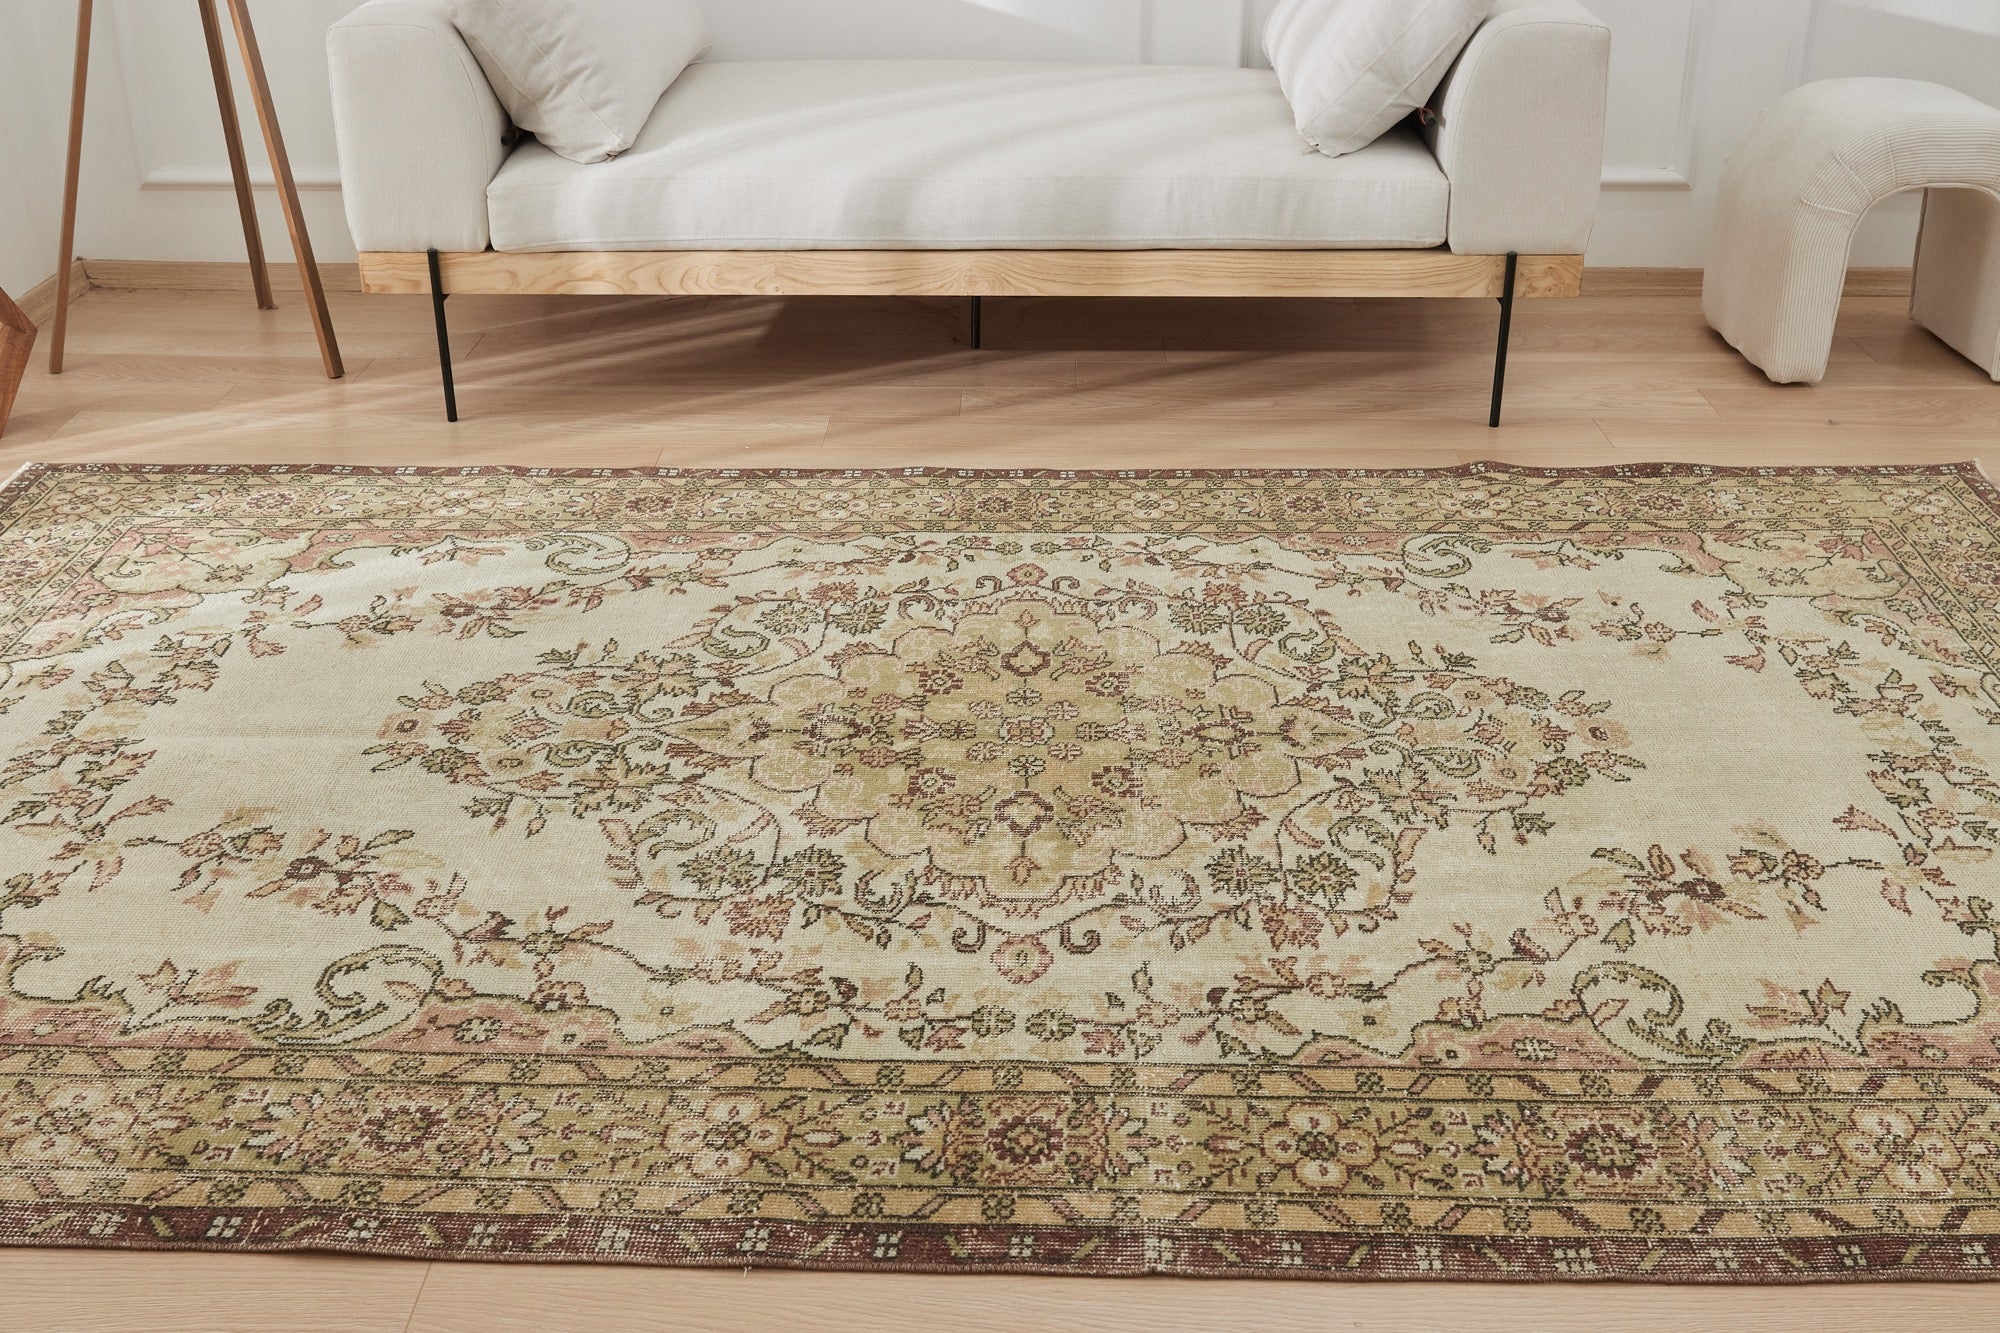 Macaria | Unique Artisan Crafted Turkish Rug | Kuden Rugs